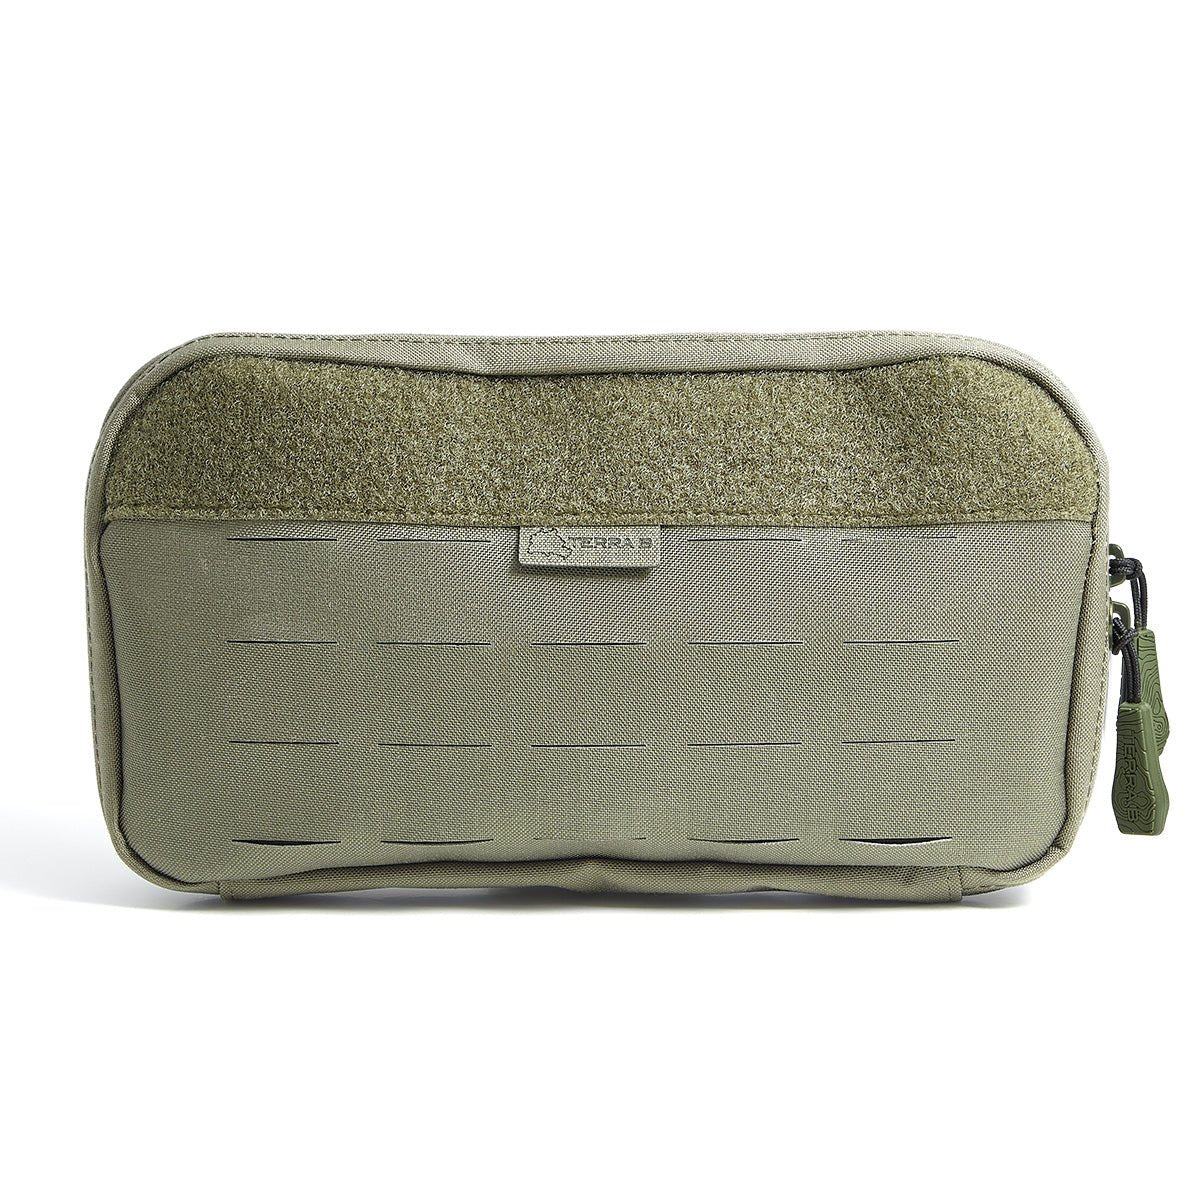 TERRA B® Leader Pouch - Olive